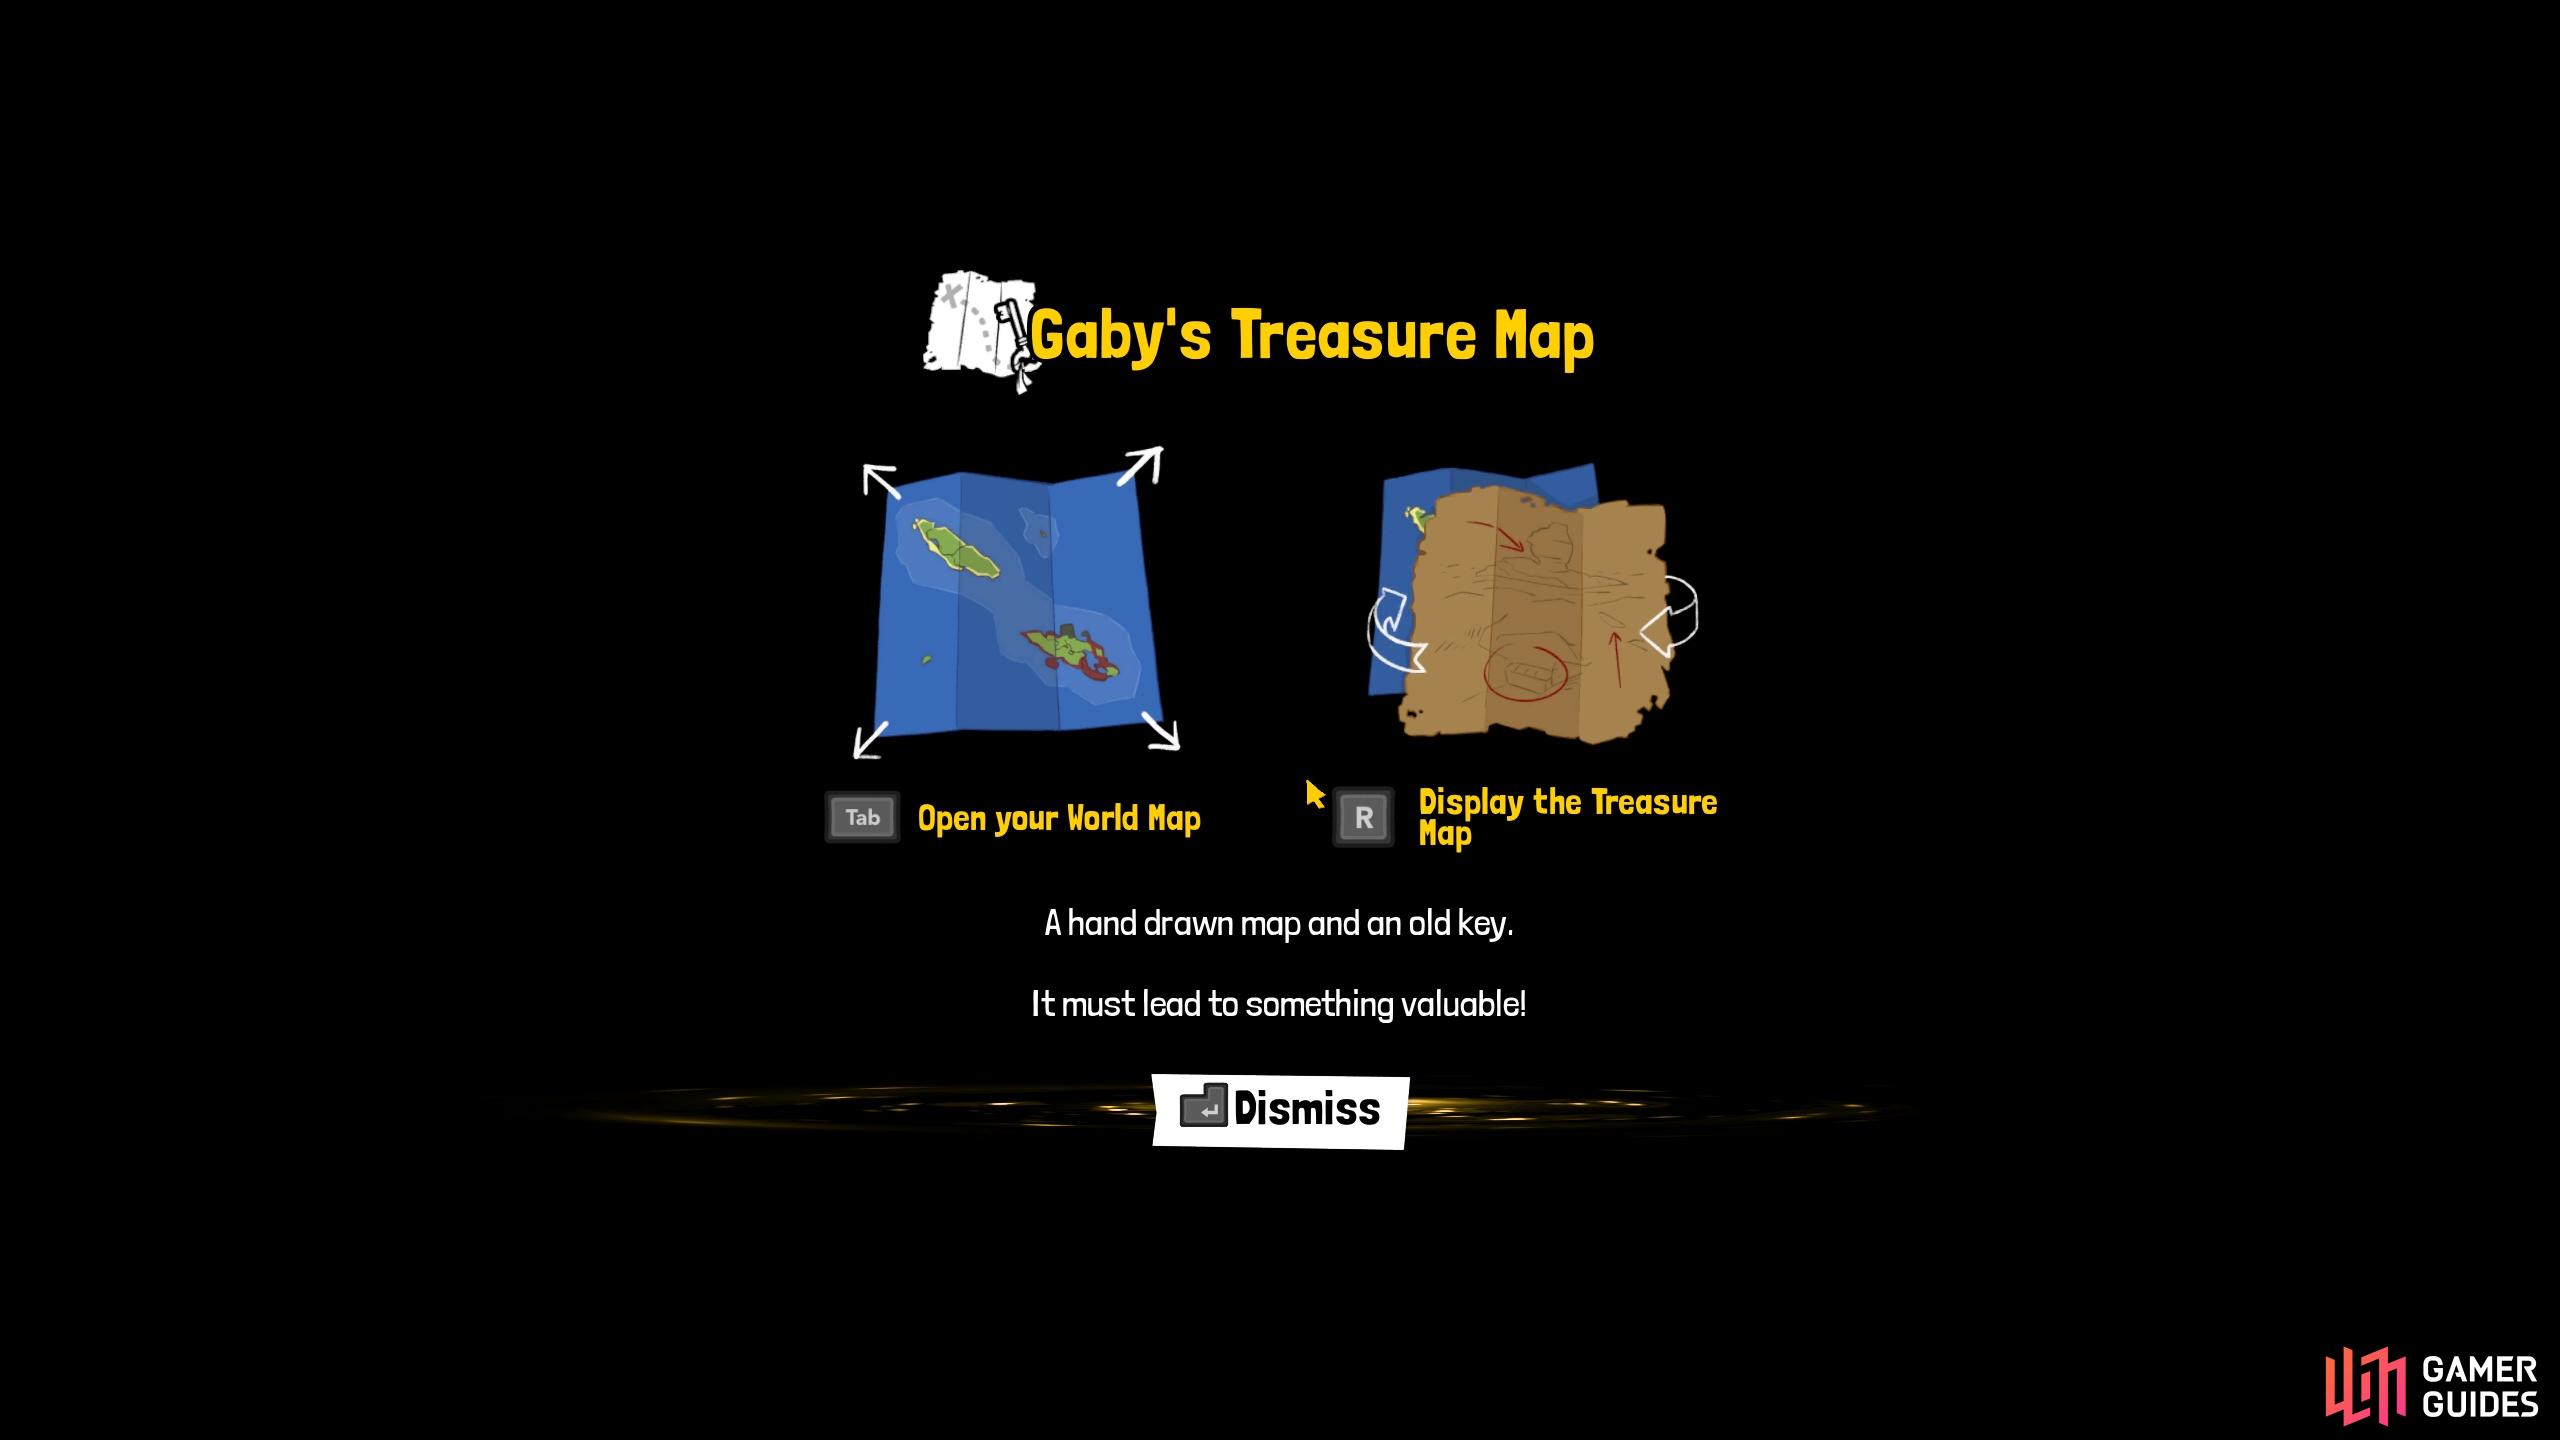 Use your map and the treasure map to figure out the location of the treasure!